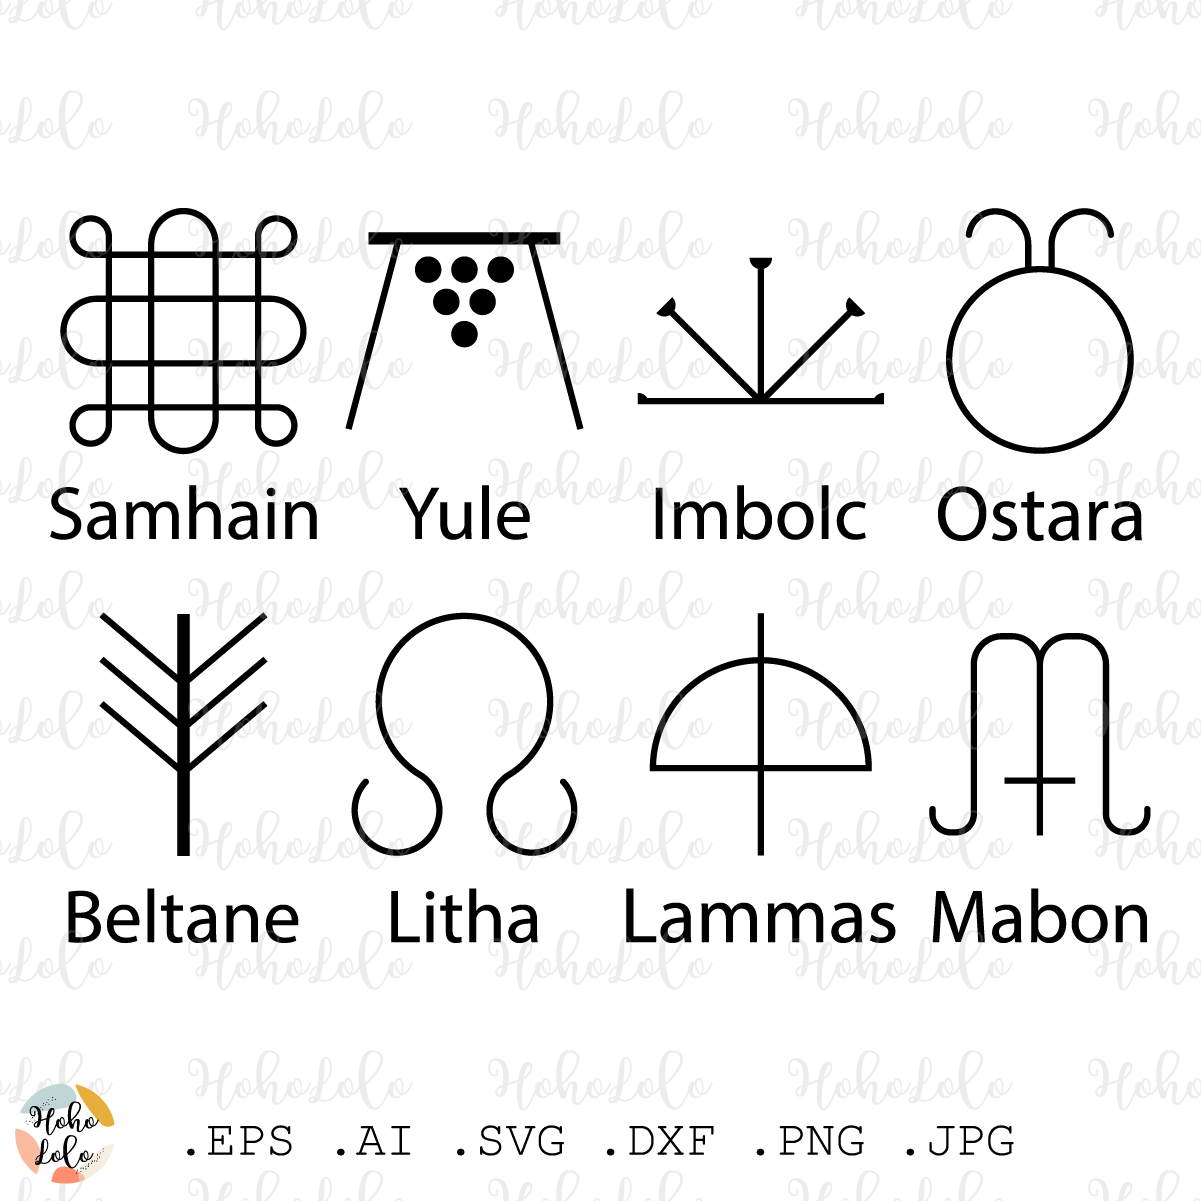 pagan symbols and meanings